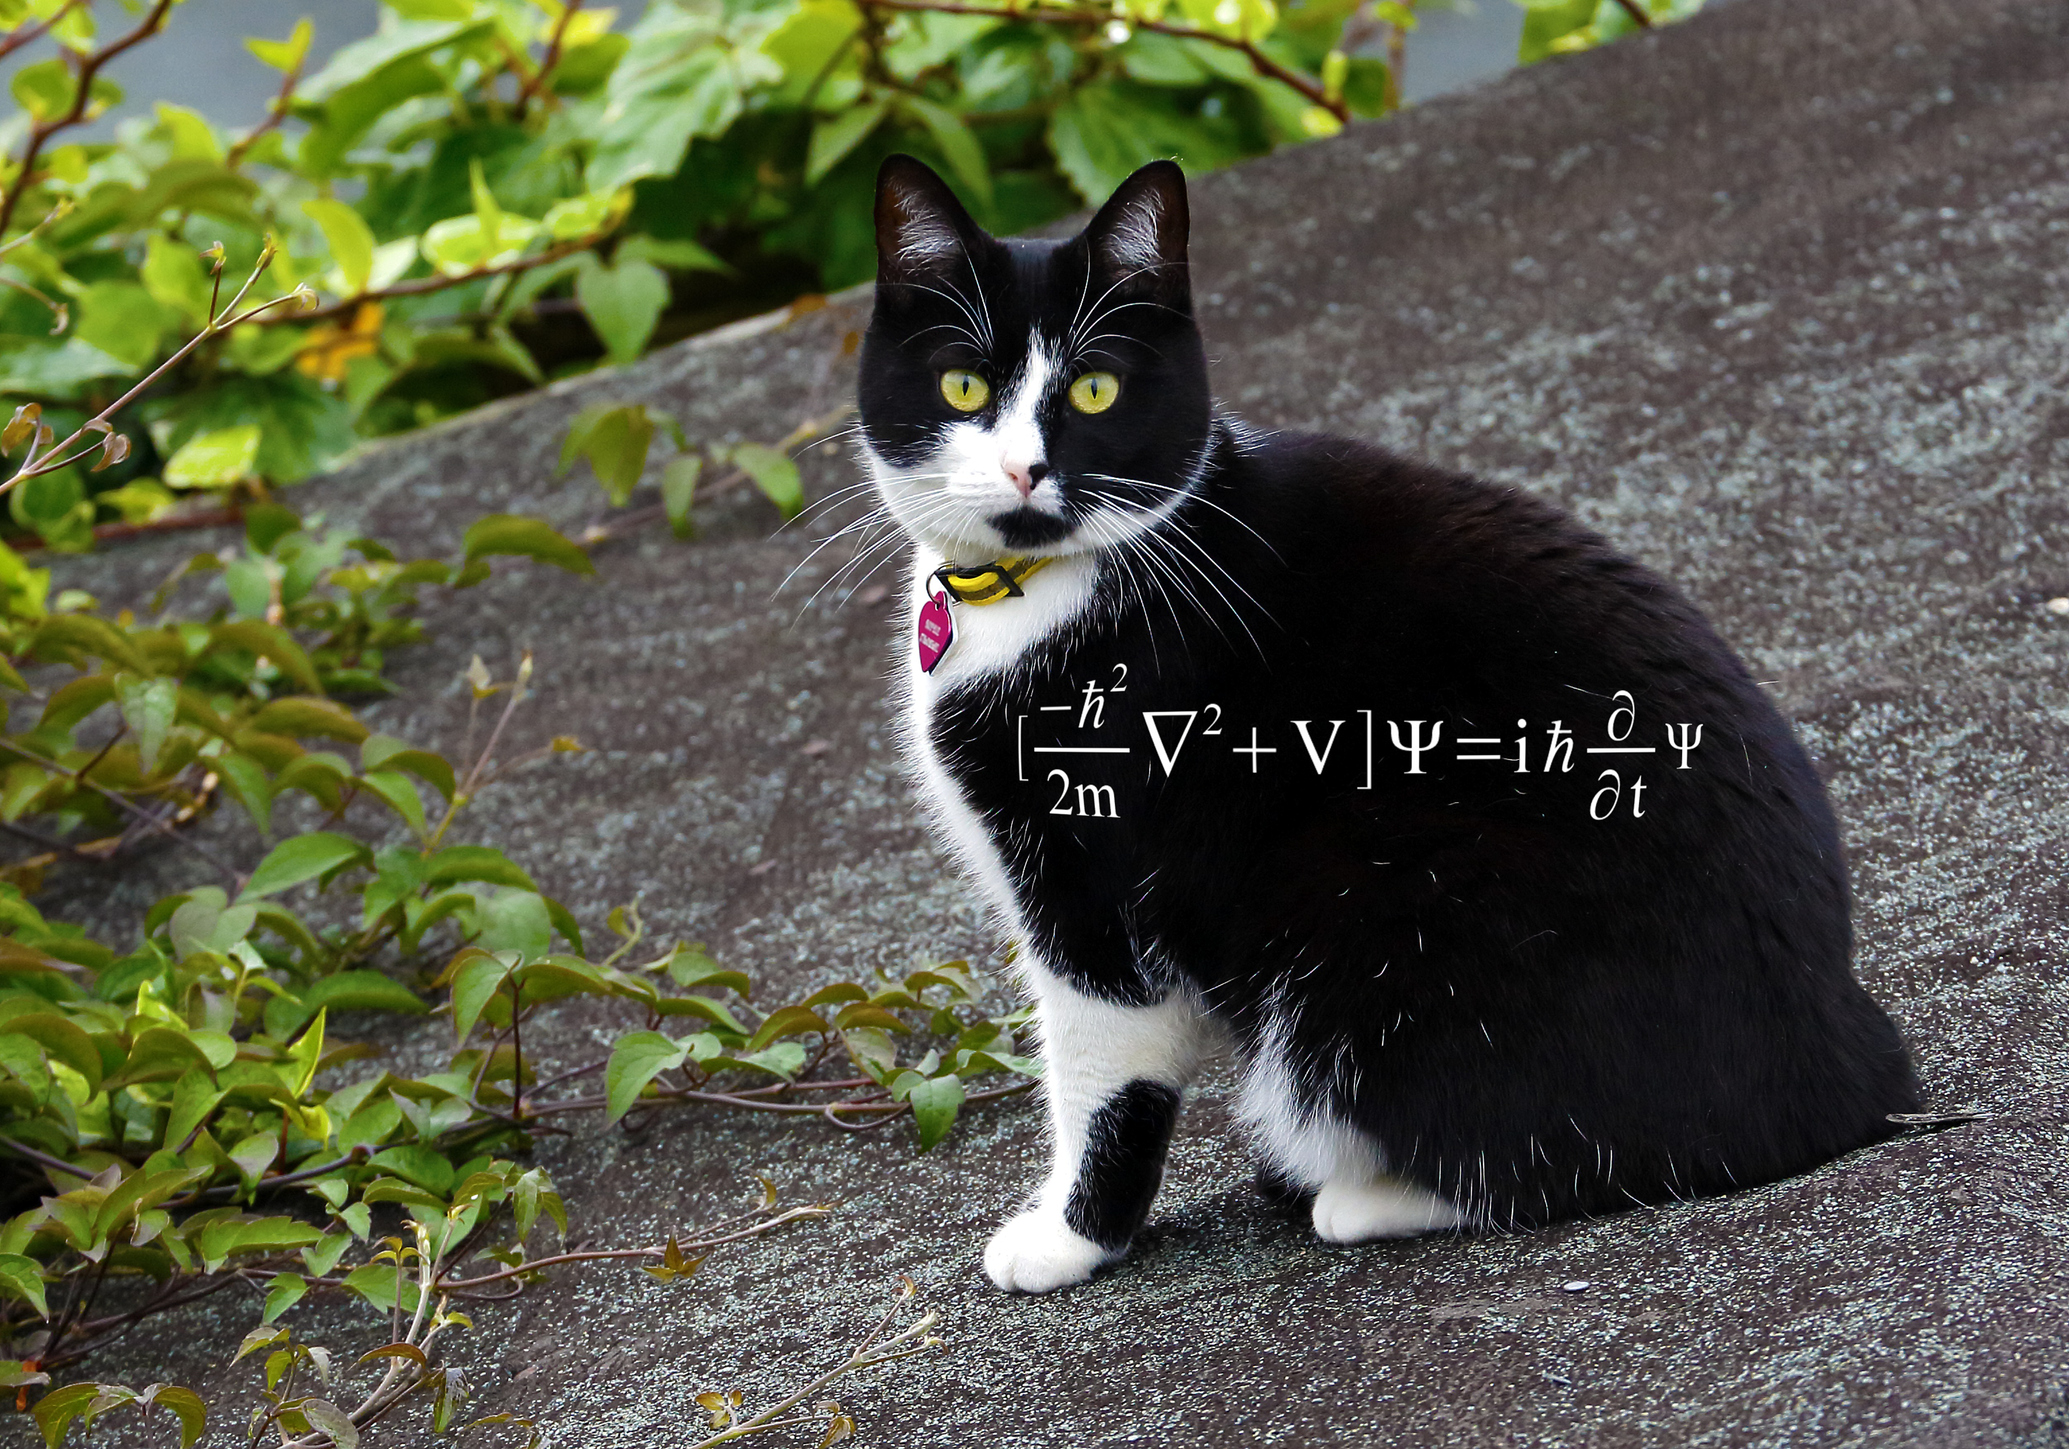 Photograph of a cat and Schrödinger's wave equation.